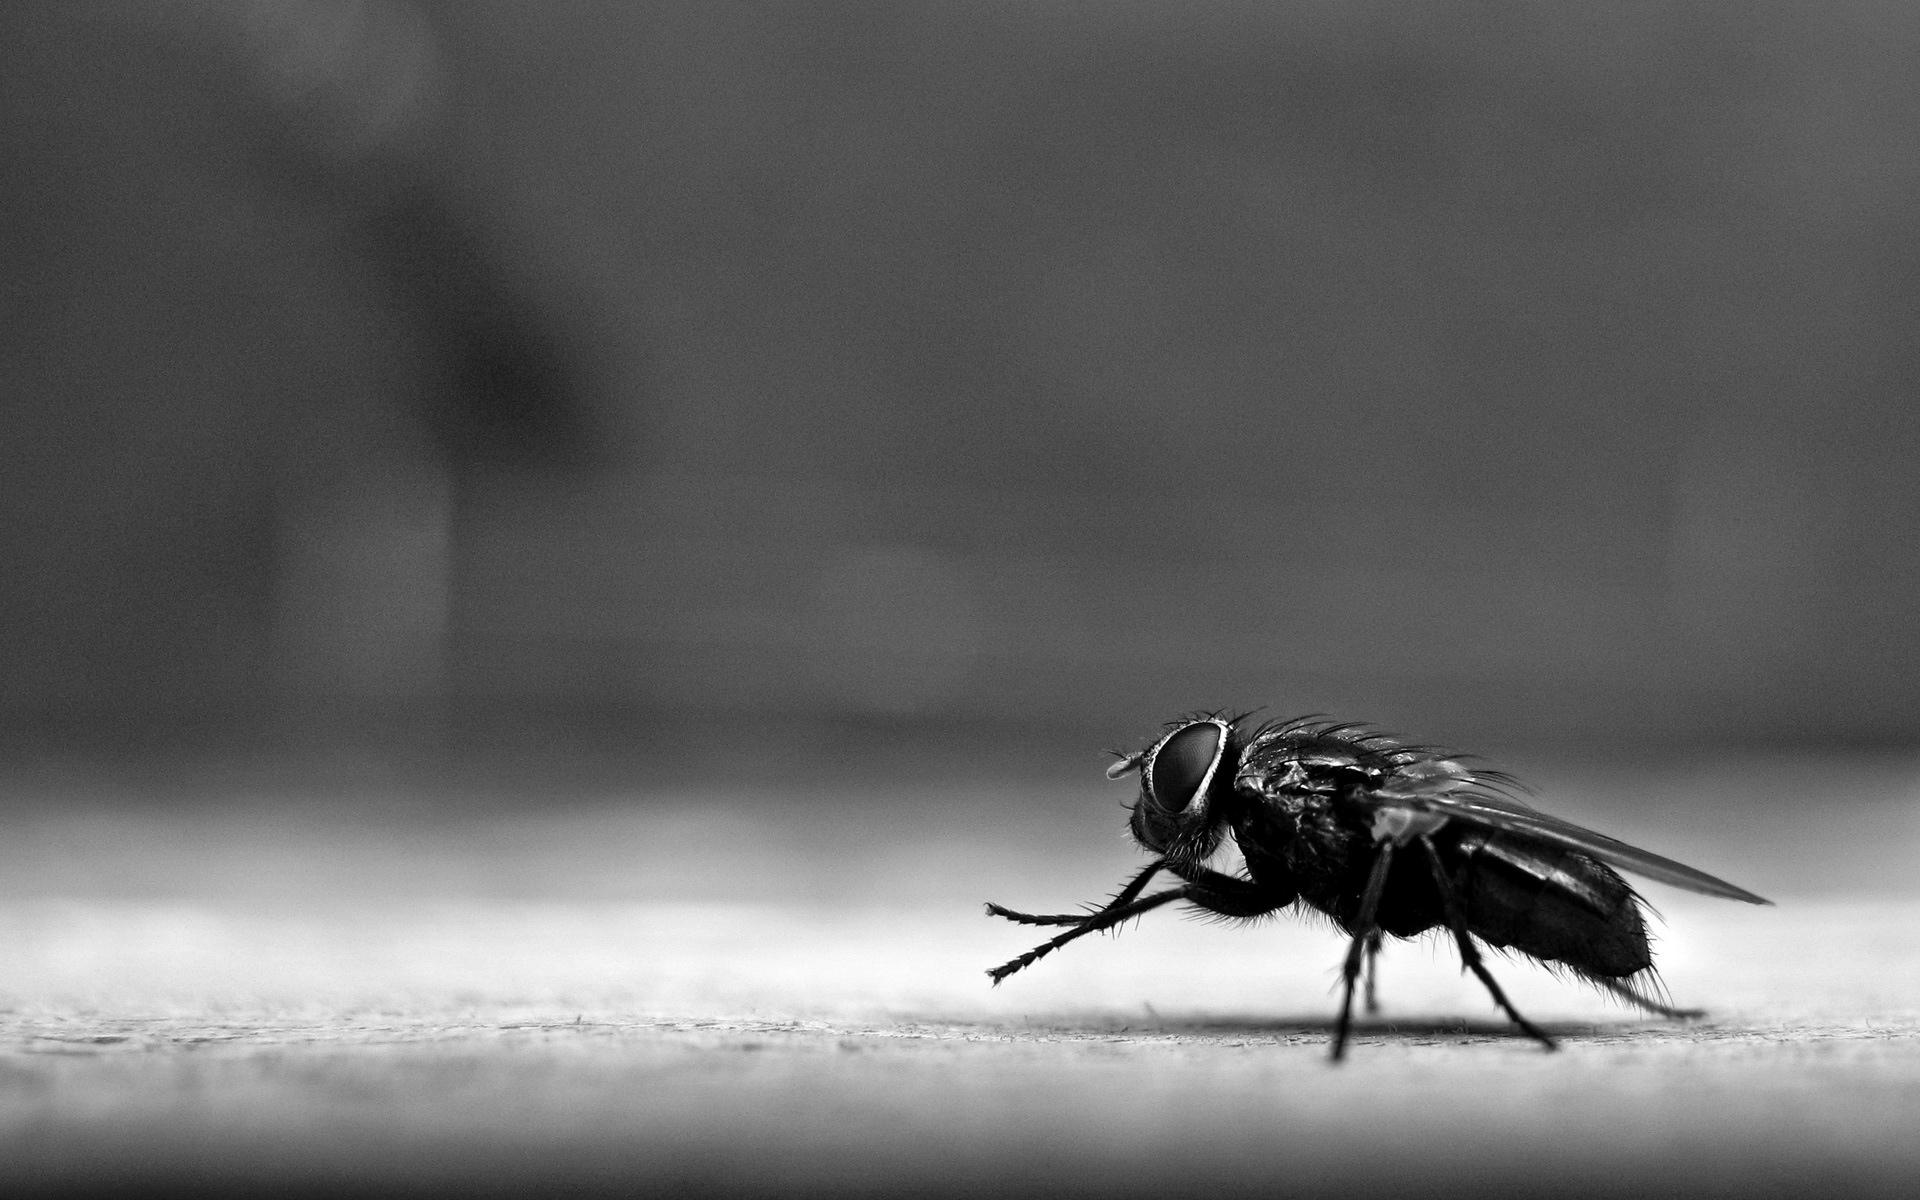 Fly Full Hd Wallpaper And Background Image 1920x1200 Afalchi Free images wallpape [afalchi.blogspot.com]